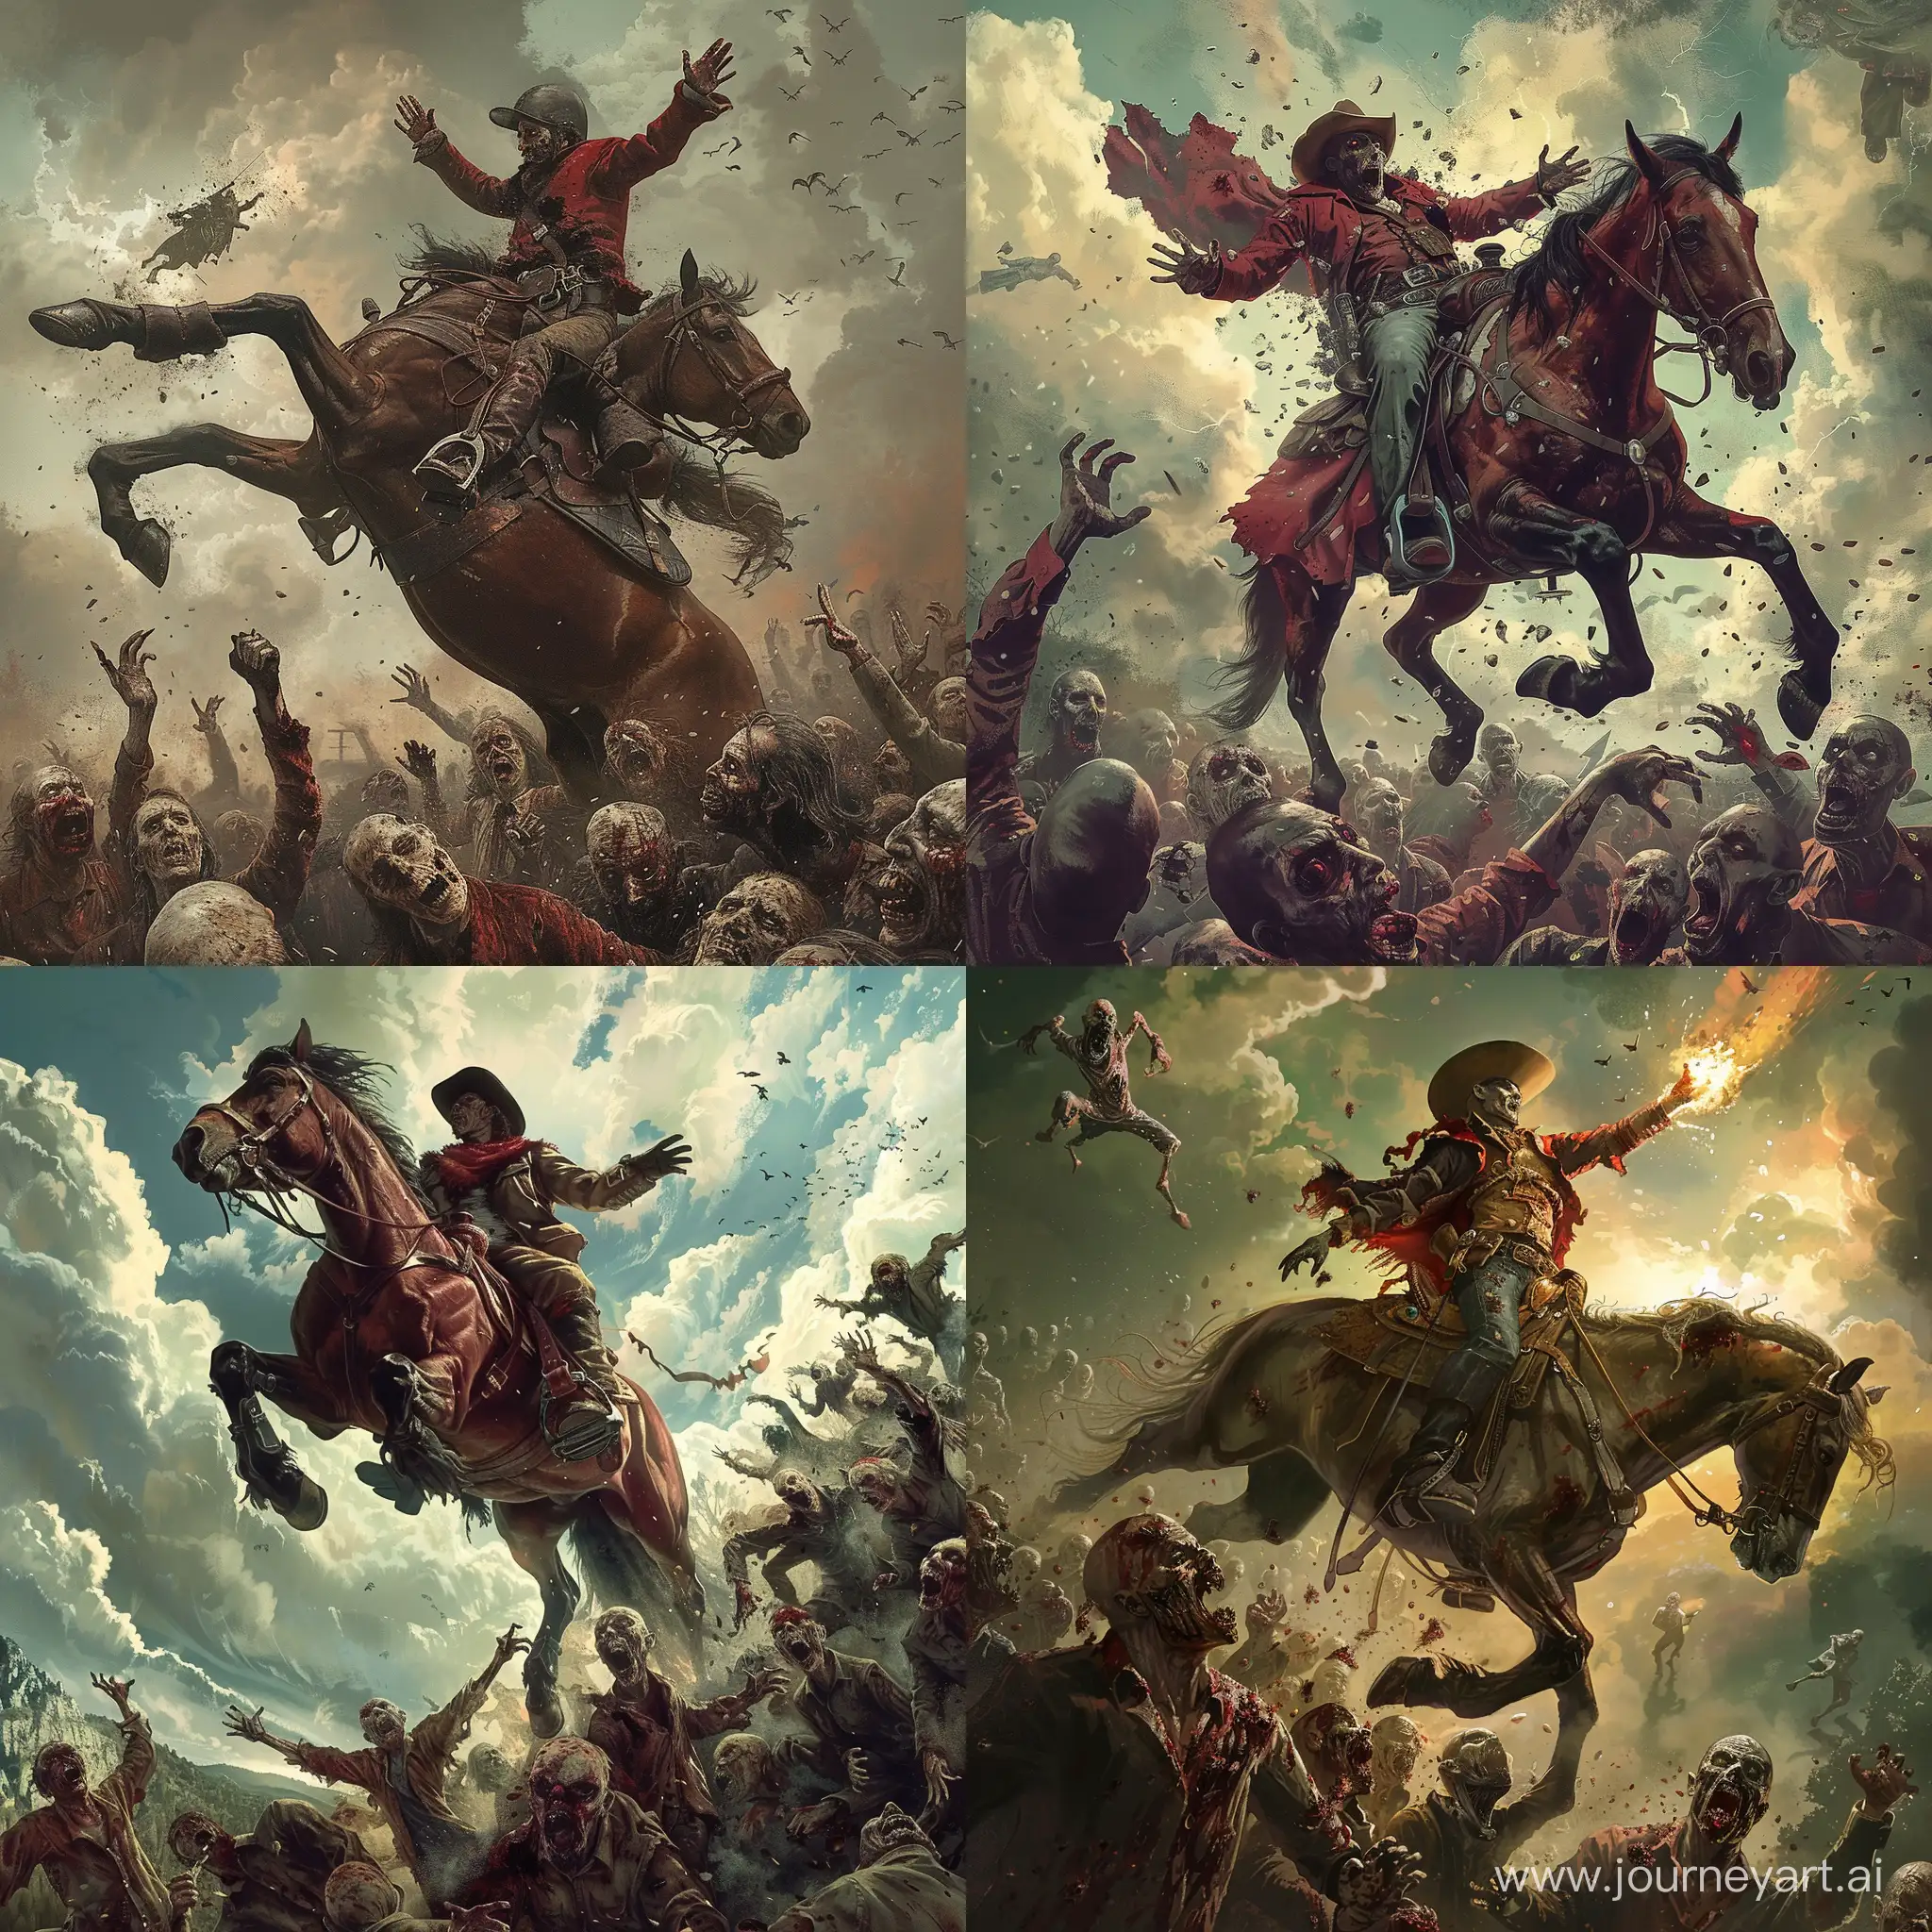 Man-Falls-from-Horse-into-Horde-of-Zombies